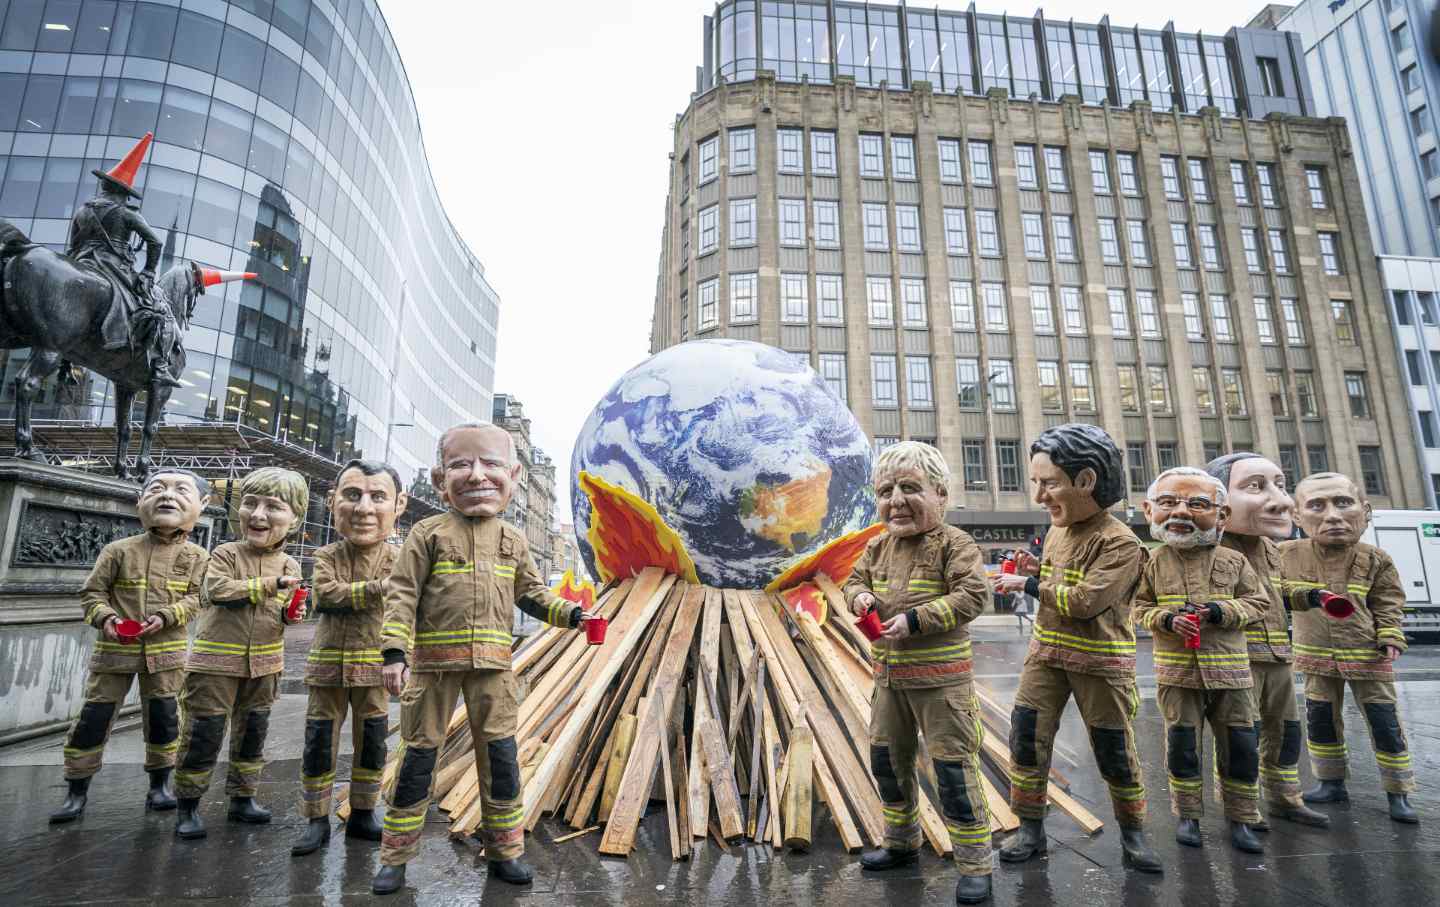 People wearing fire suits and masks of world leaders stand around a sculpture of the Earth on a pyre.